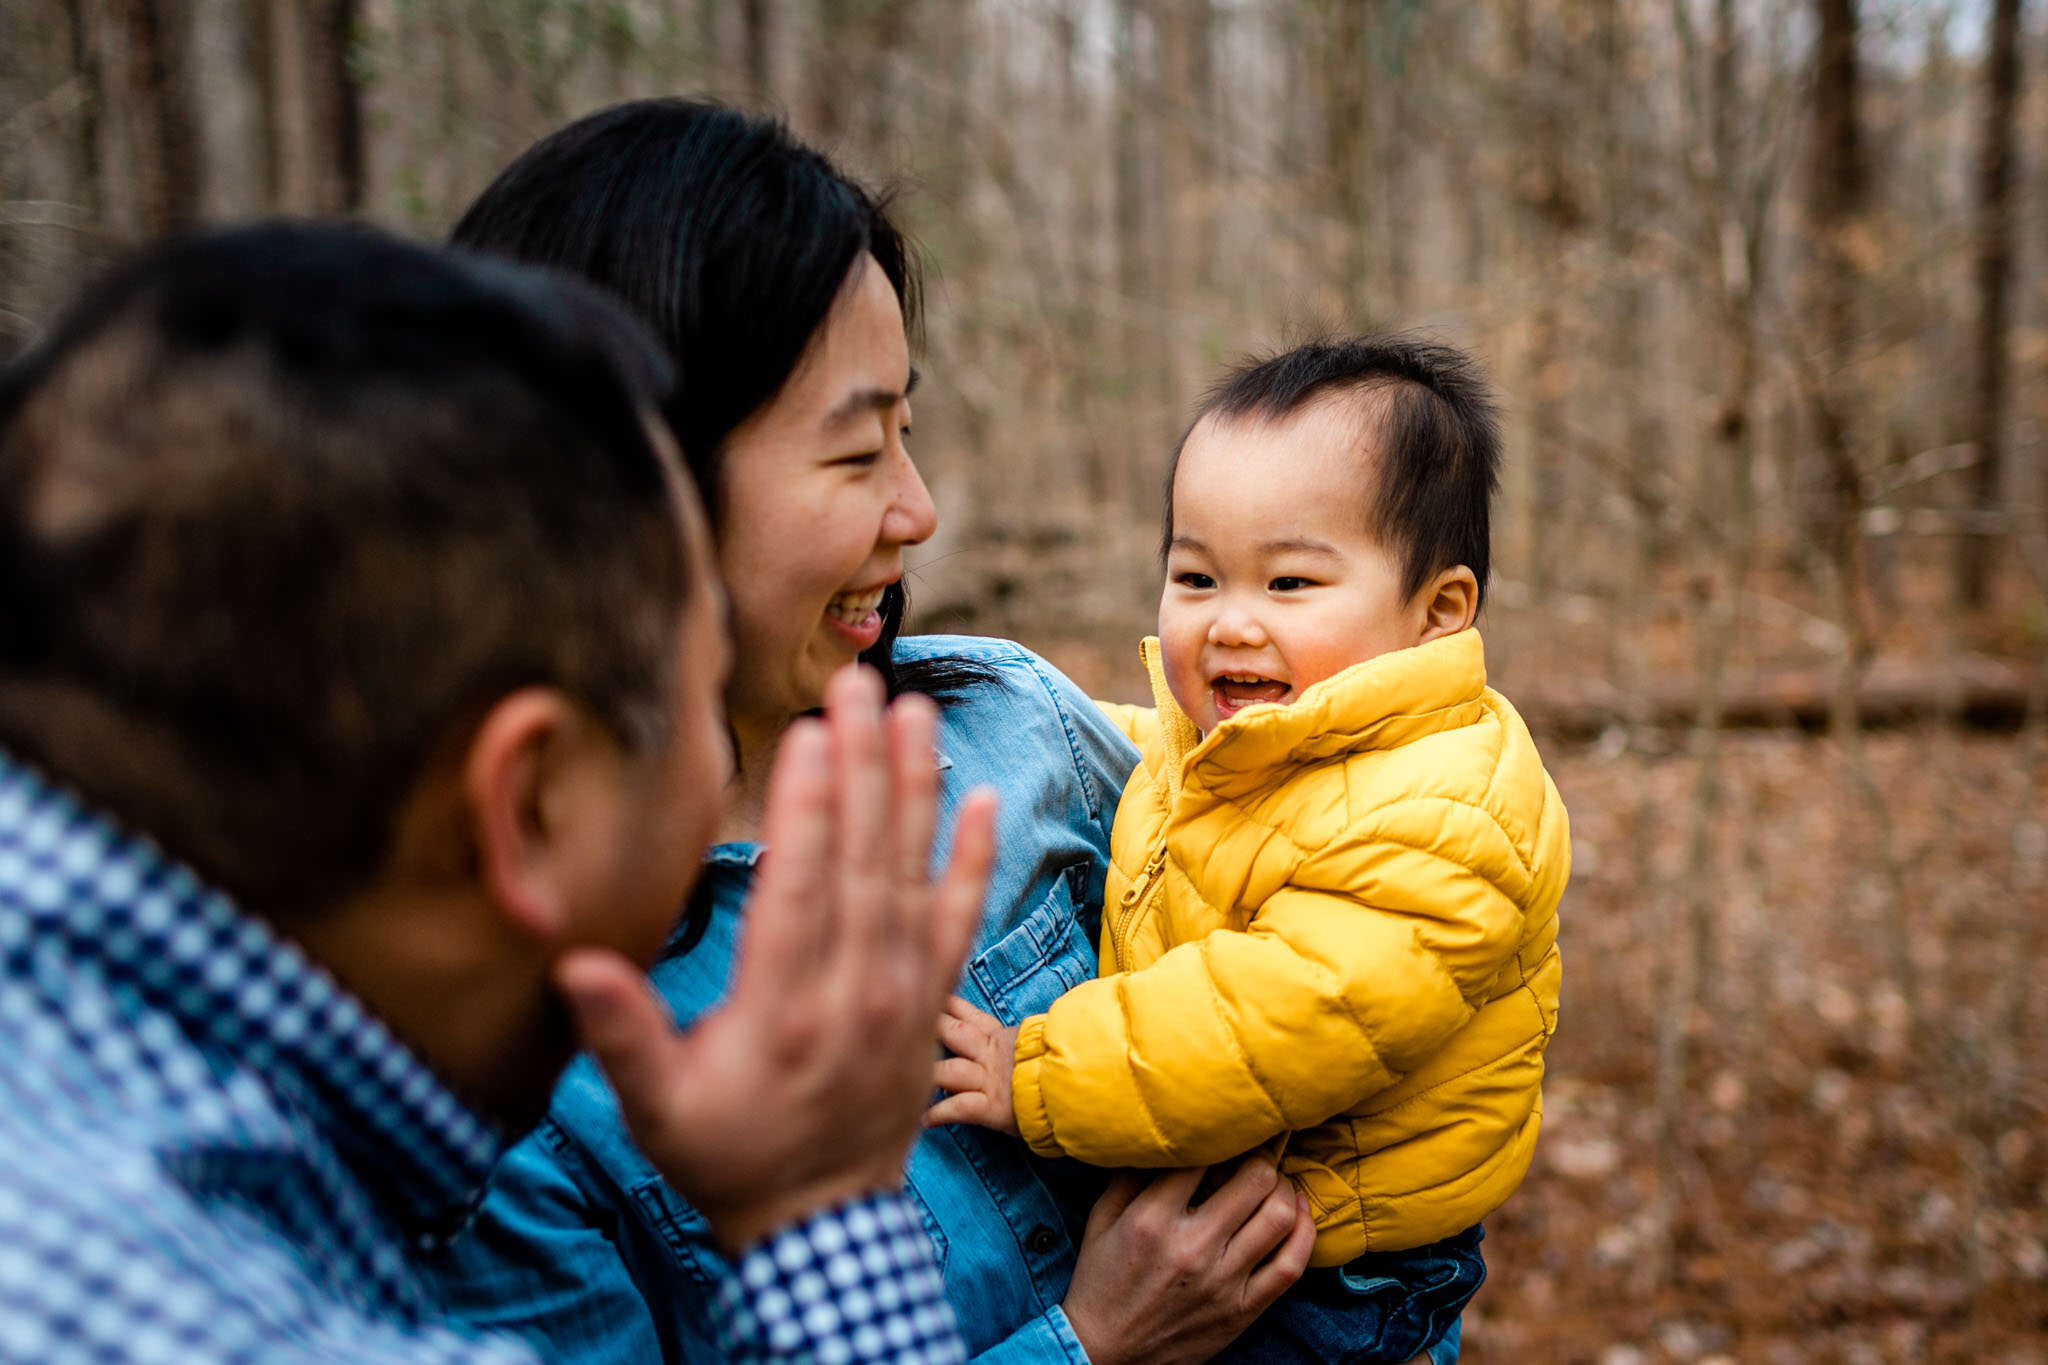 Raleigh Family Photographer | By G. Lin Photography | Umstead Park | Young baby laughing